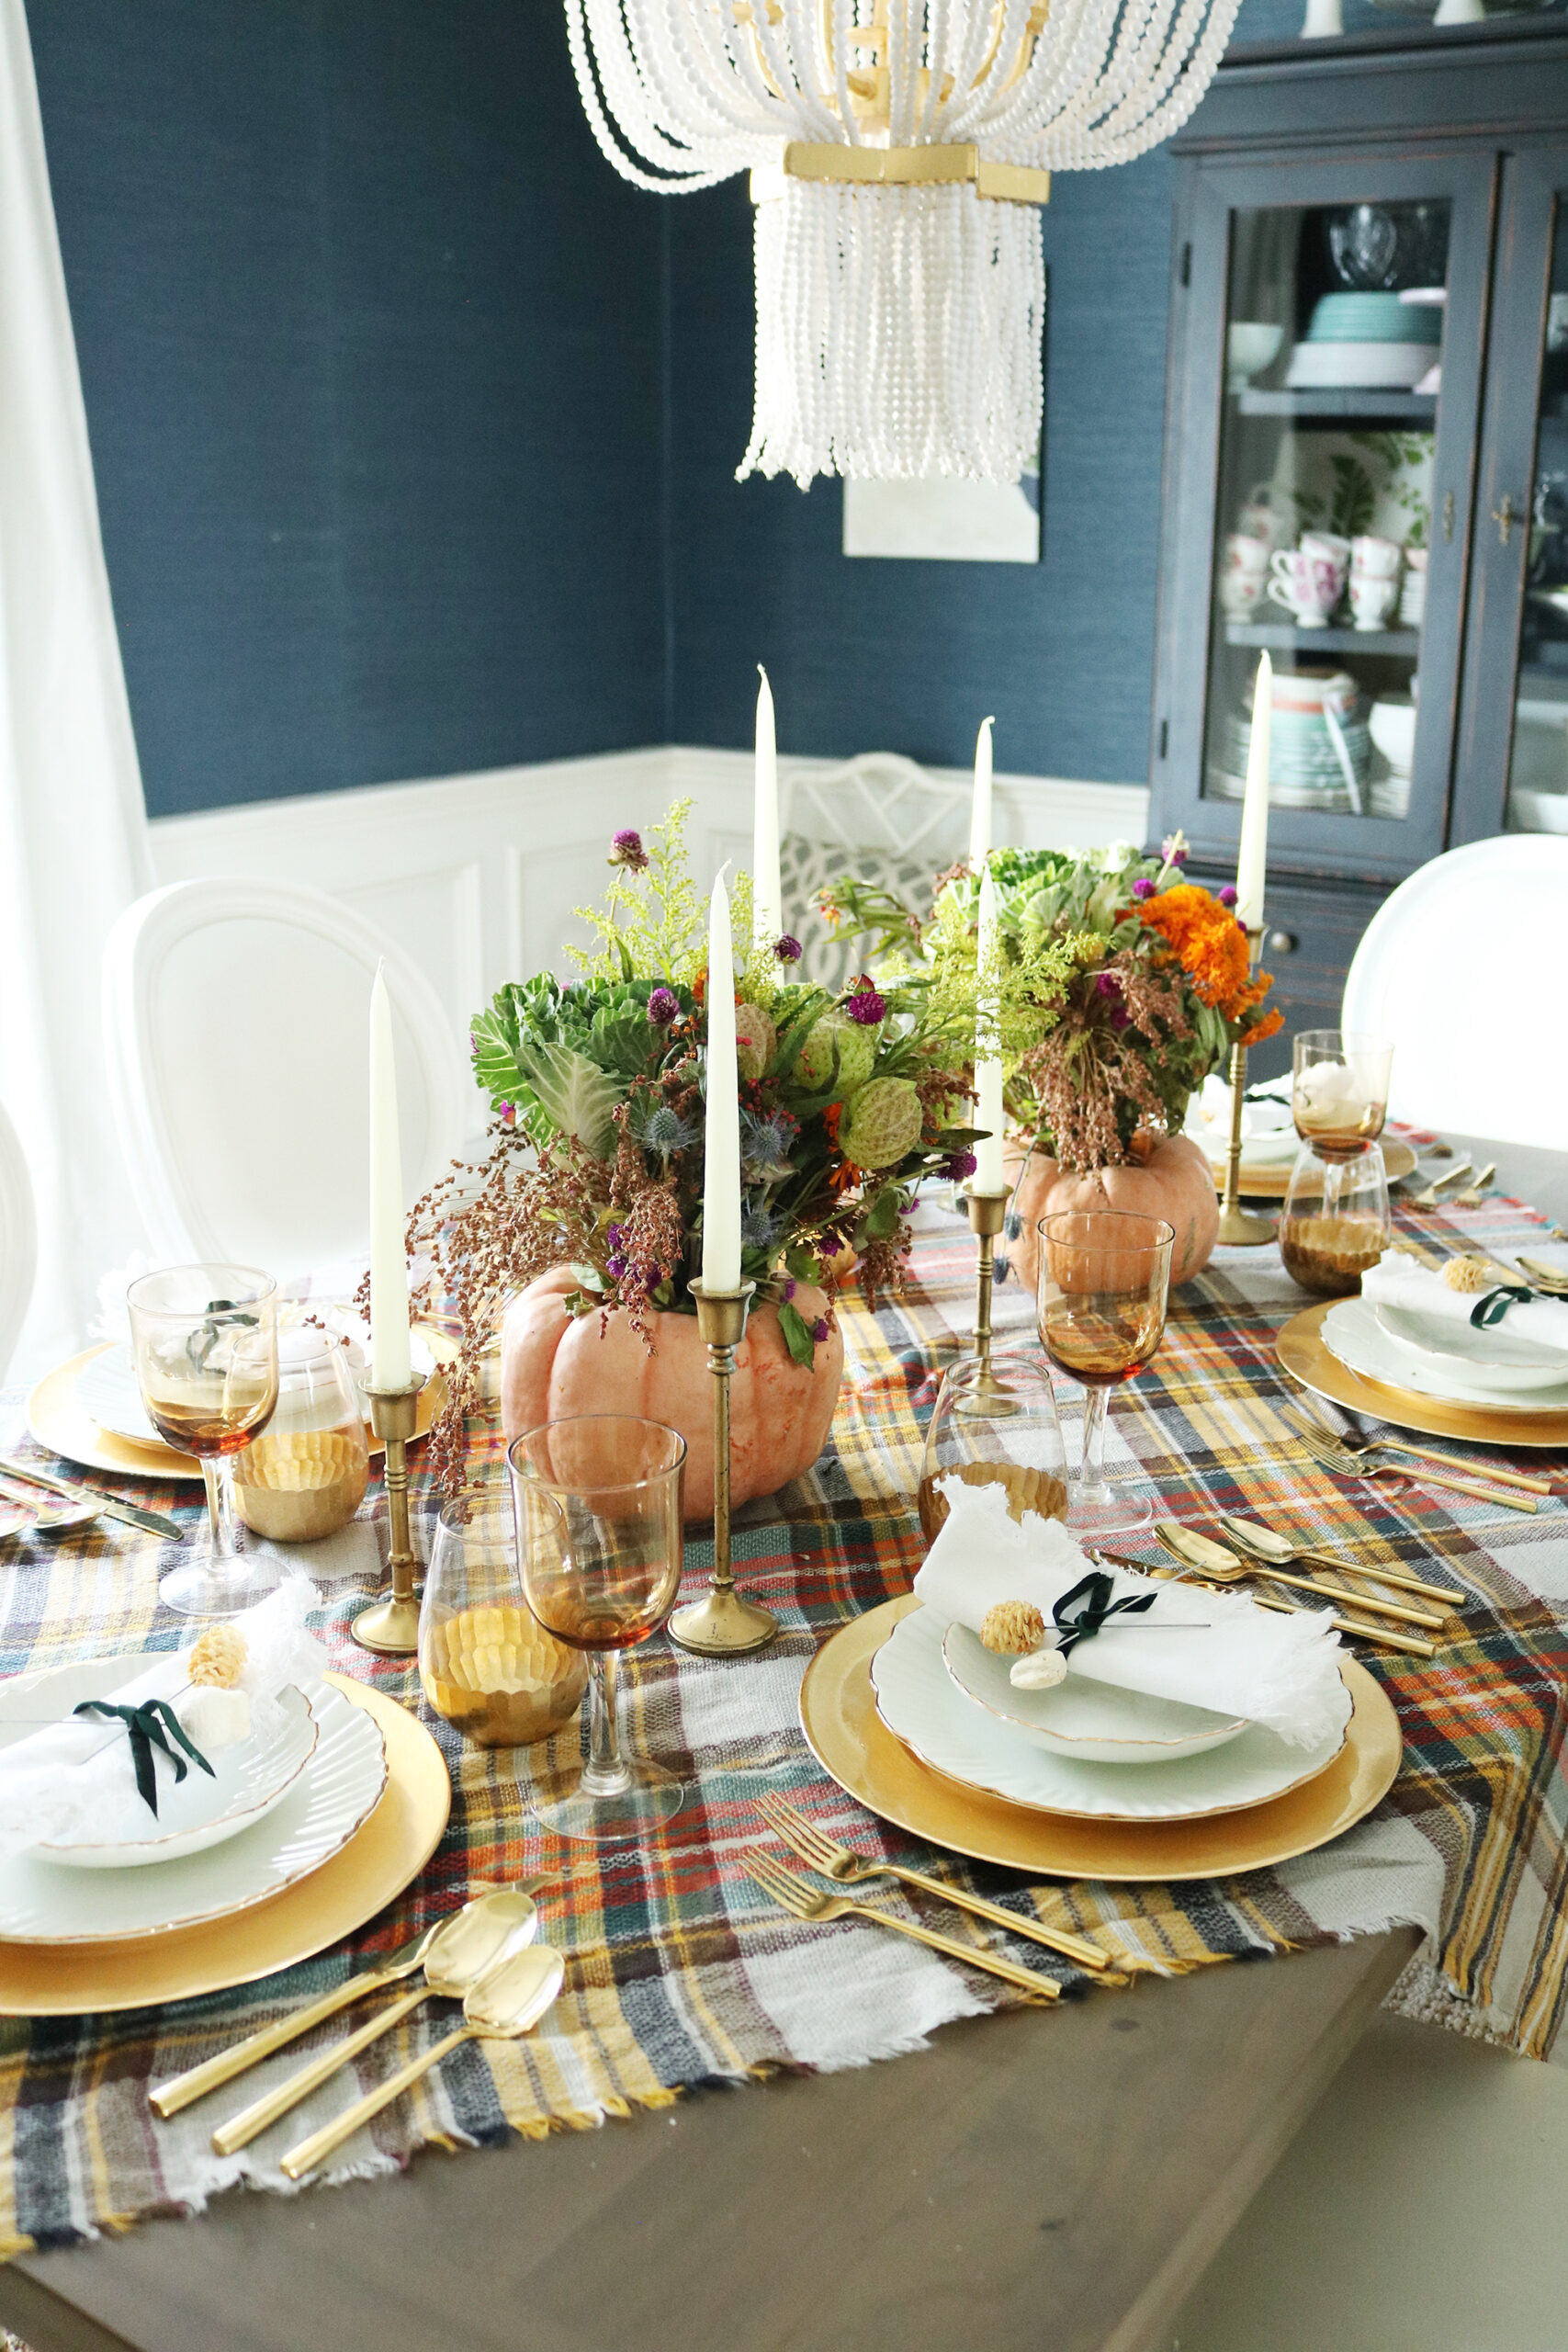 Pumpkin Gourd Flower Arrangements and Plaid Tablecloth for our Thanksgiving Tablescape makes it Fall Plaids for Thanksgiving || Darling Darleen Top CT Lifestyle Blogger